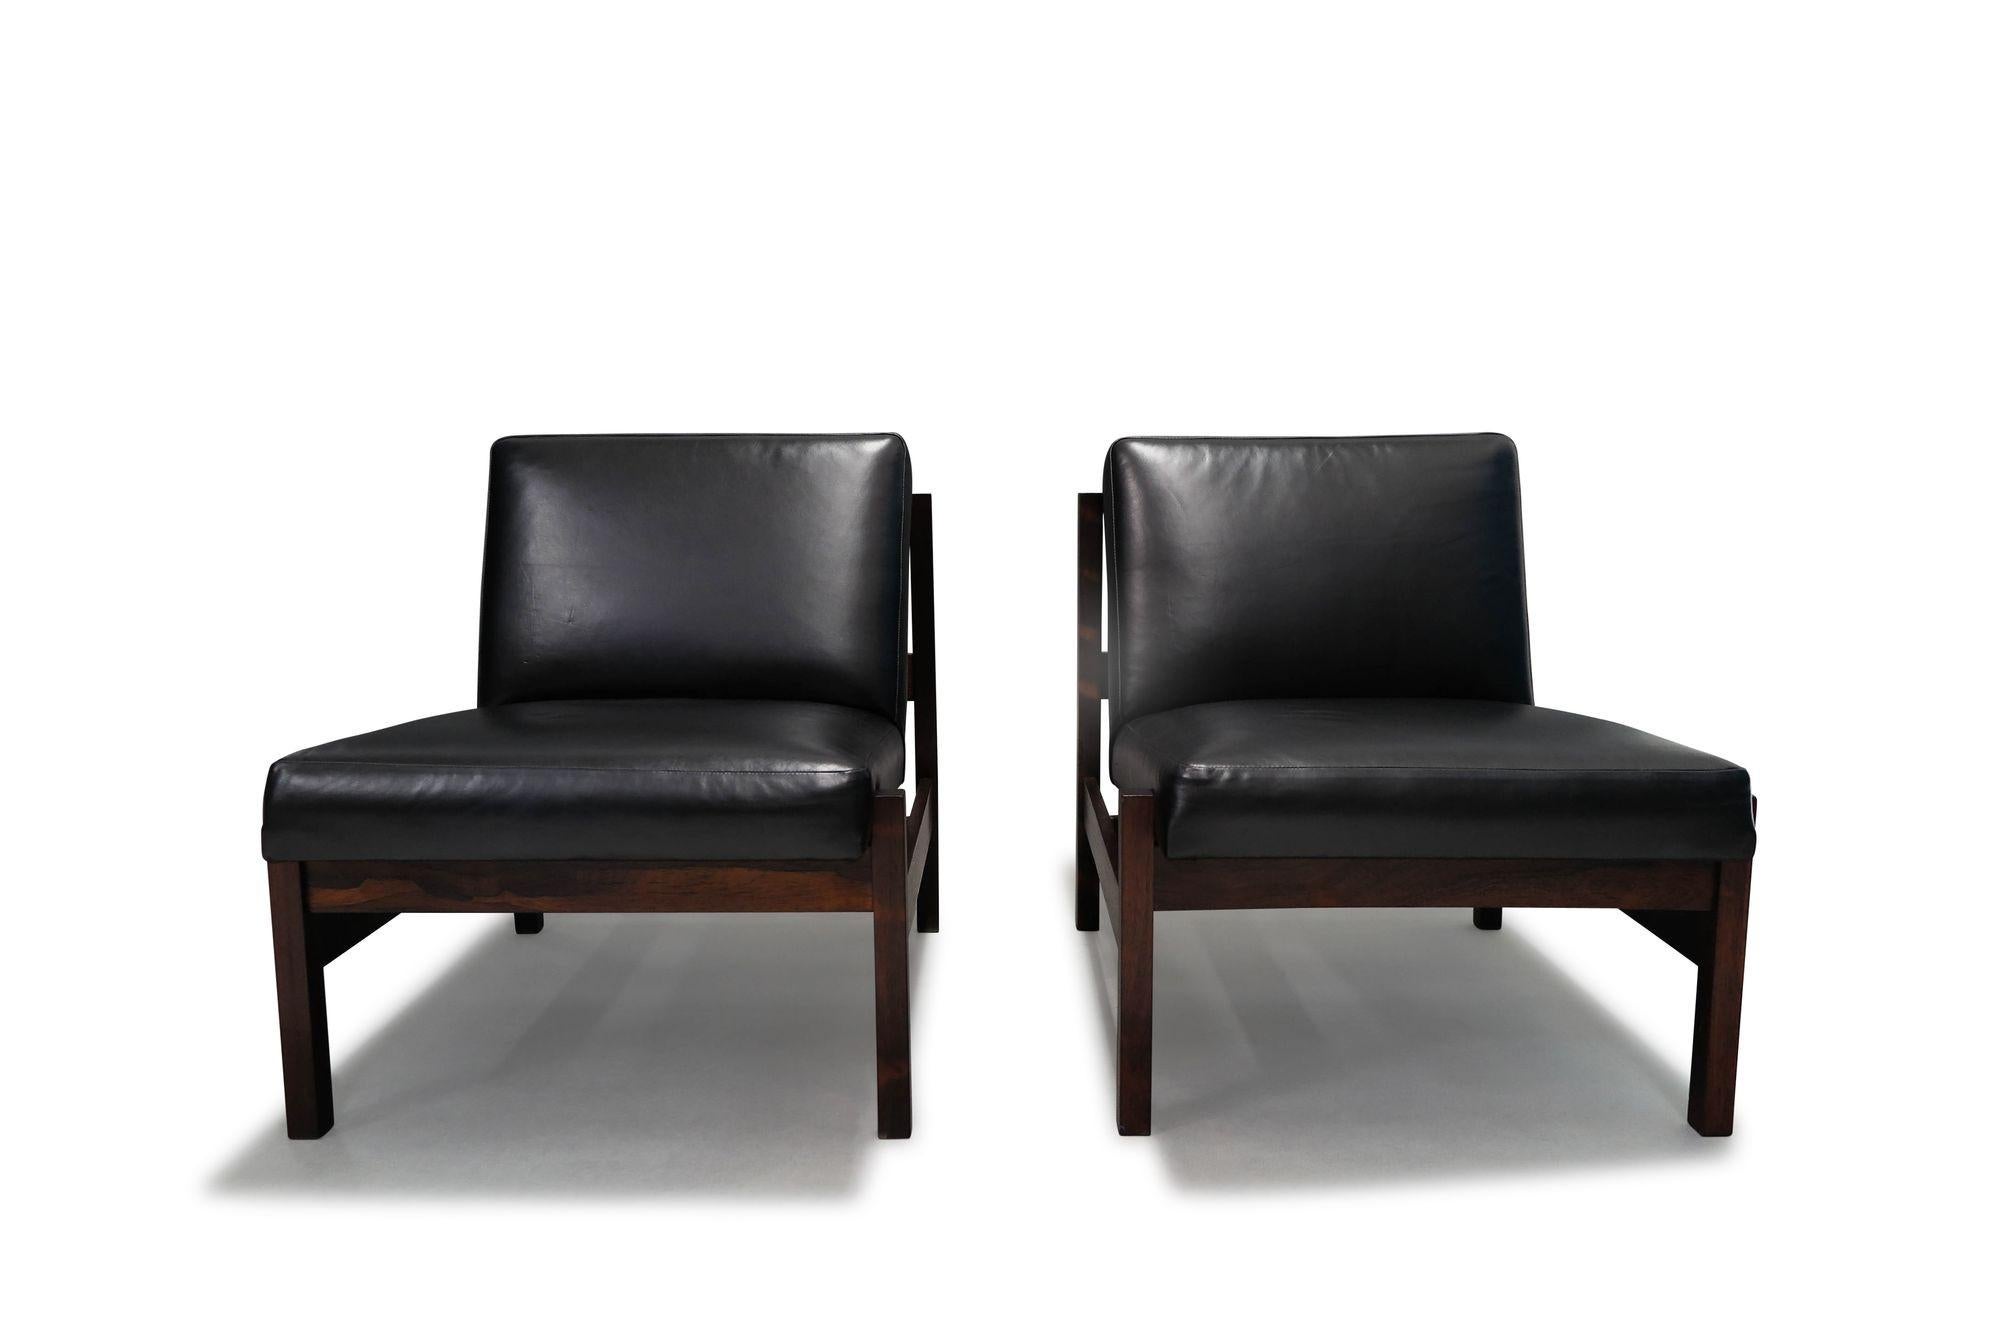 Forma Brazil Rosewood Lounge Chairs in Black Leather In Excellent Condition For Sale In Oakland, CA